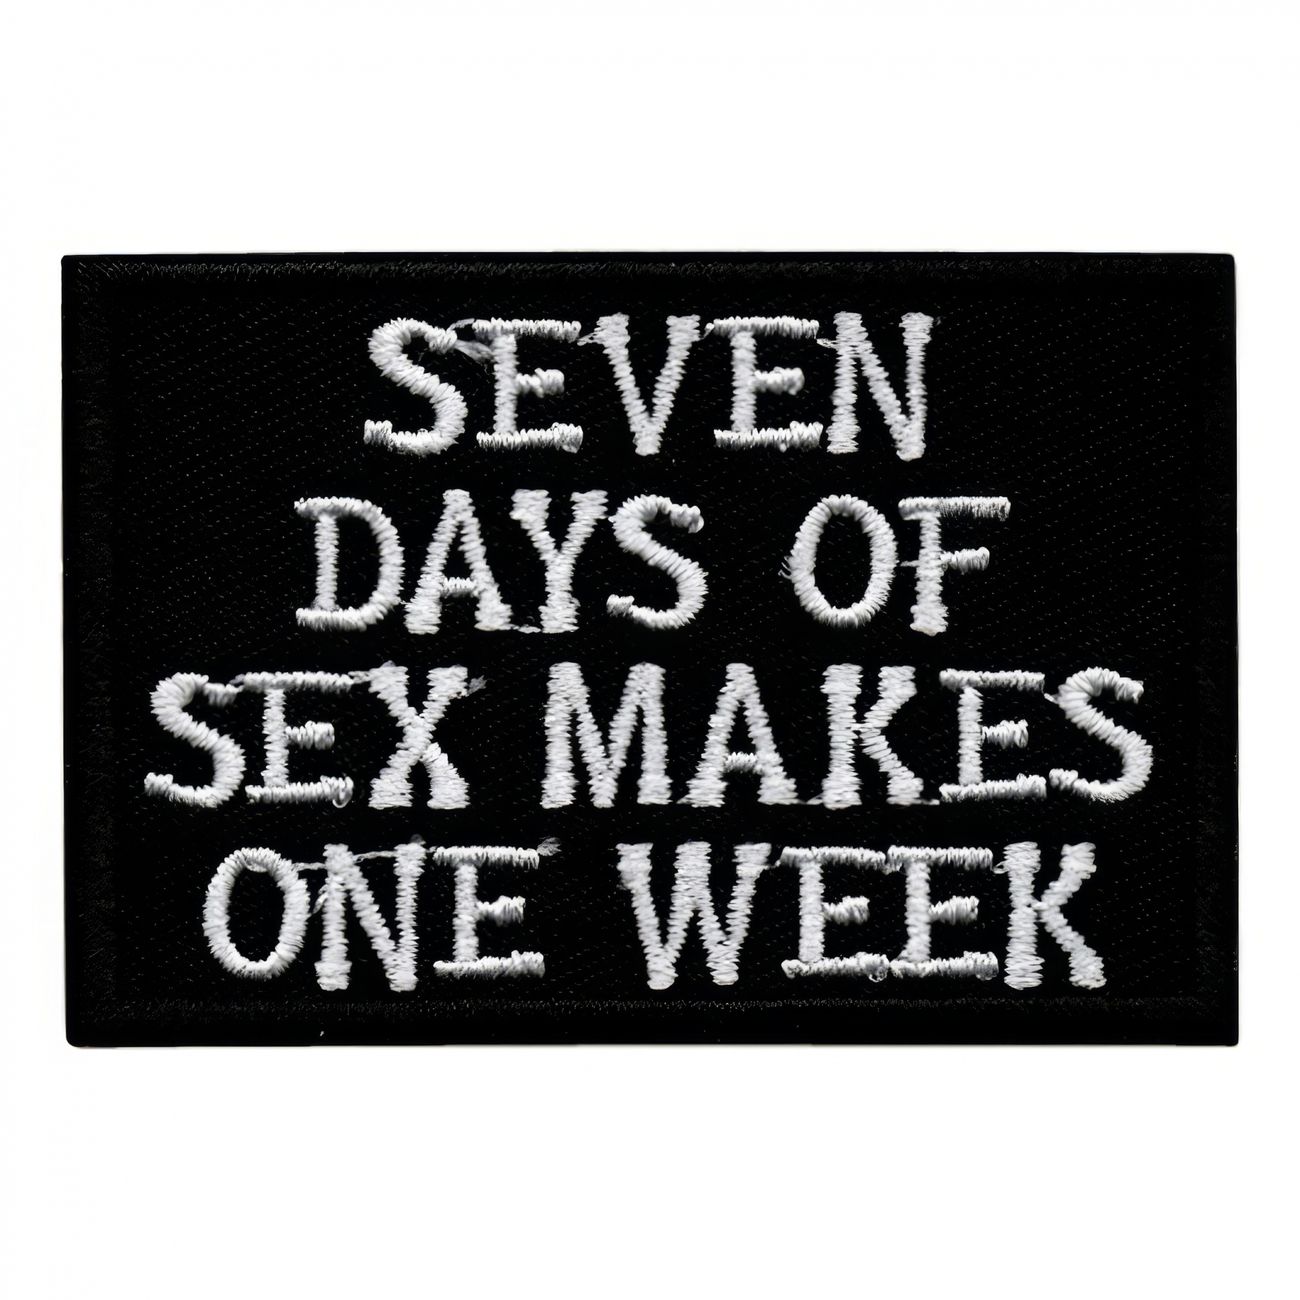 tygmarke-seven-days-of-sex-makes-one-week-a-94394-1